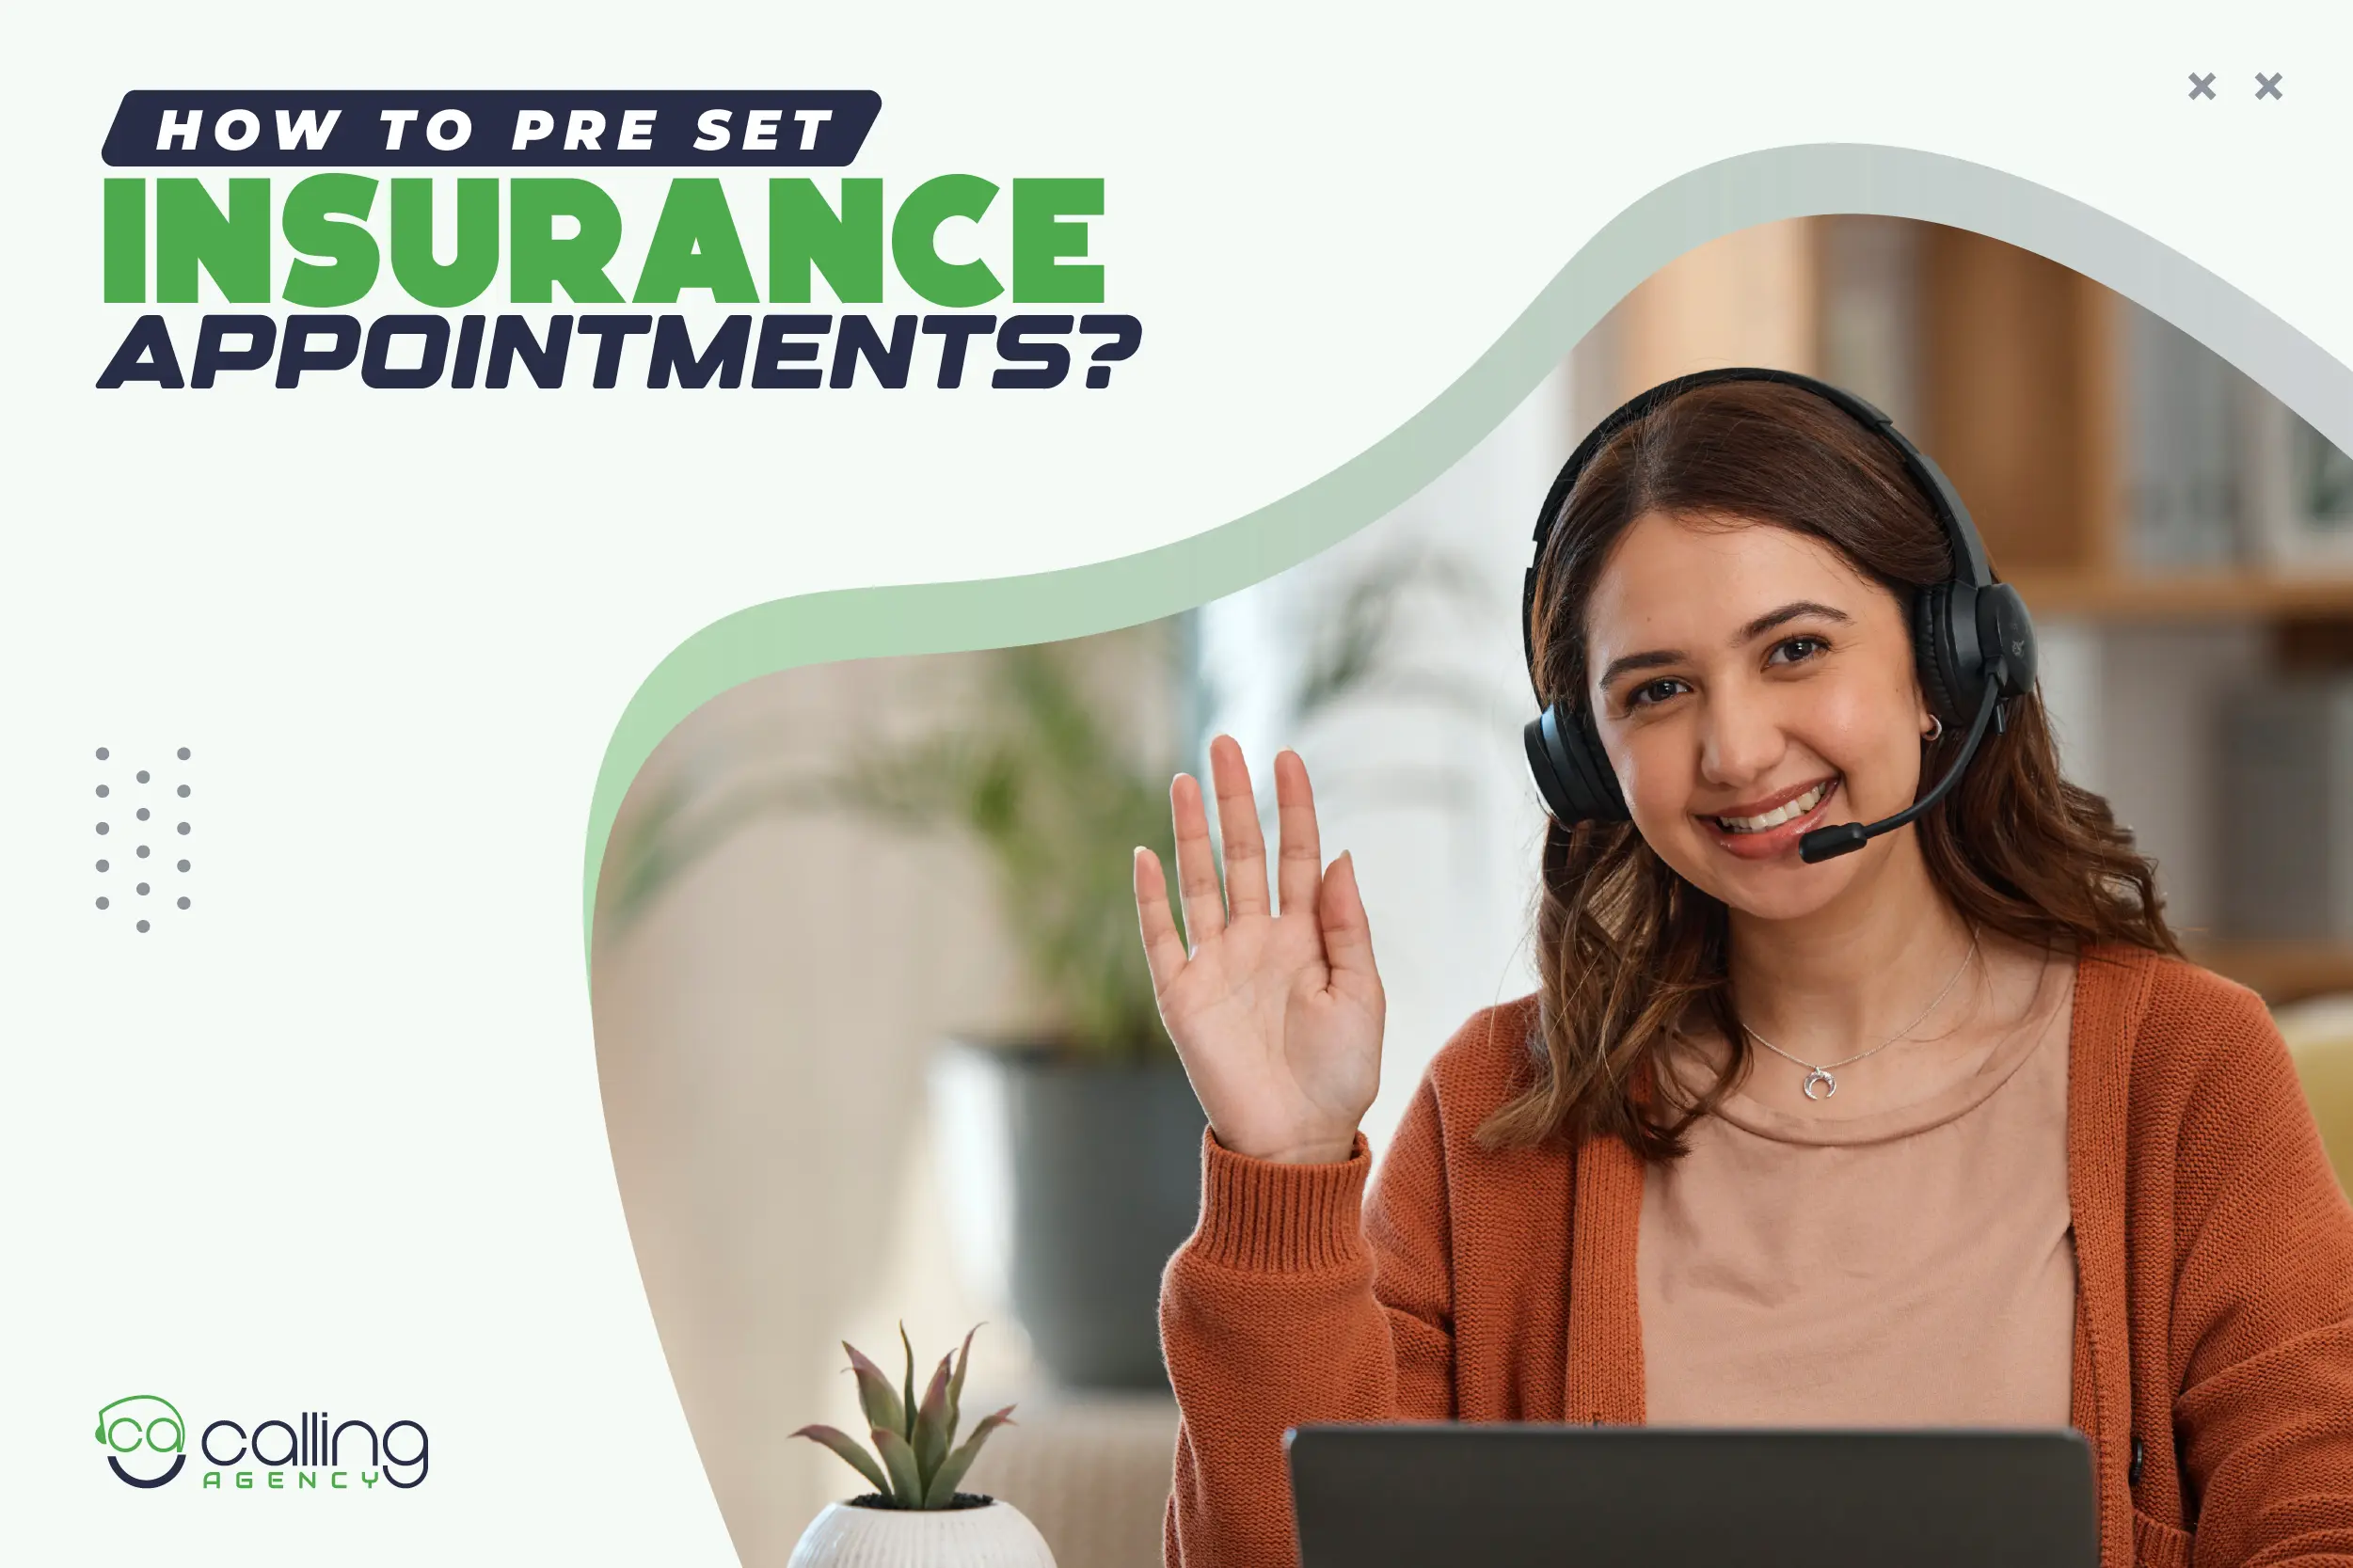 How To Pre-Set Insurance Appointments (For Remote Appointment Setters)